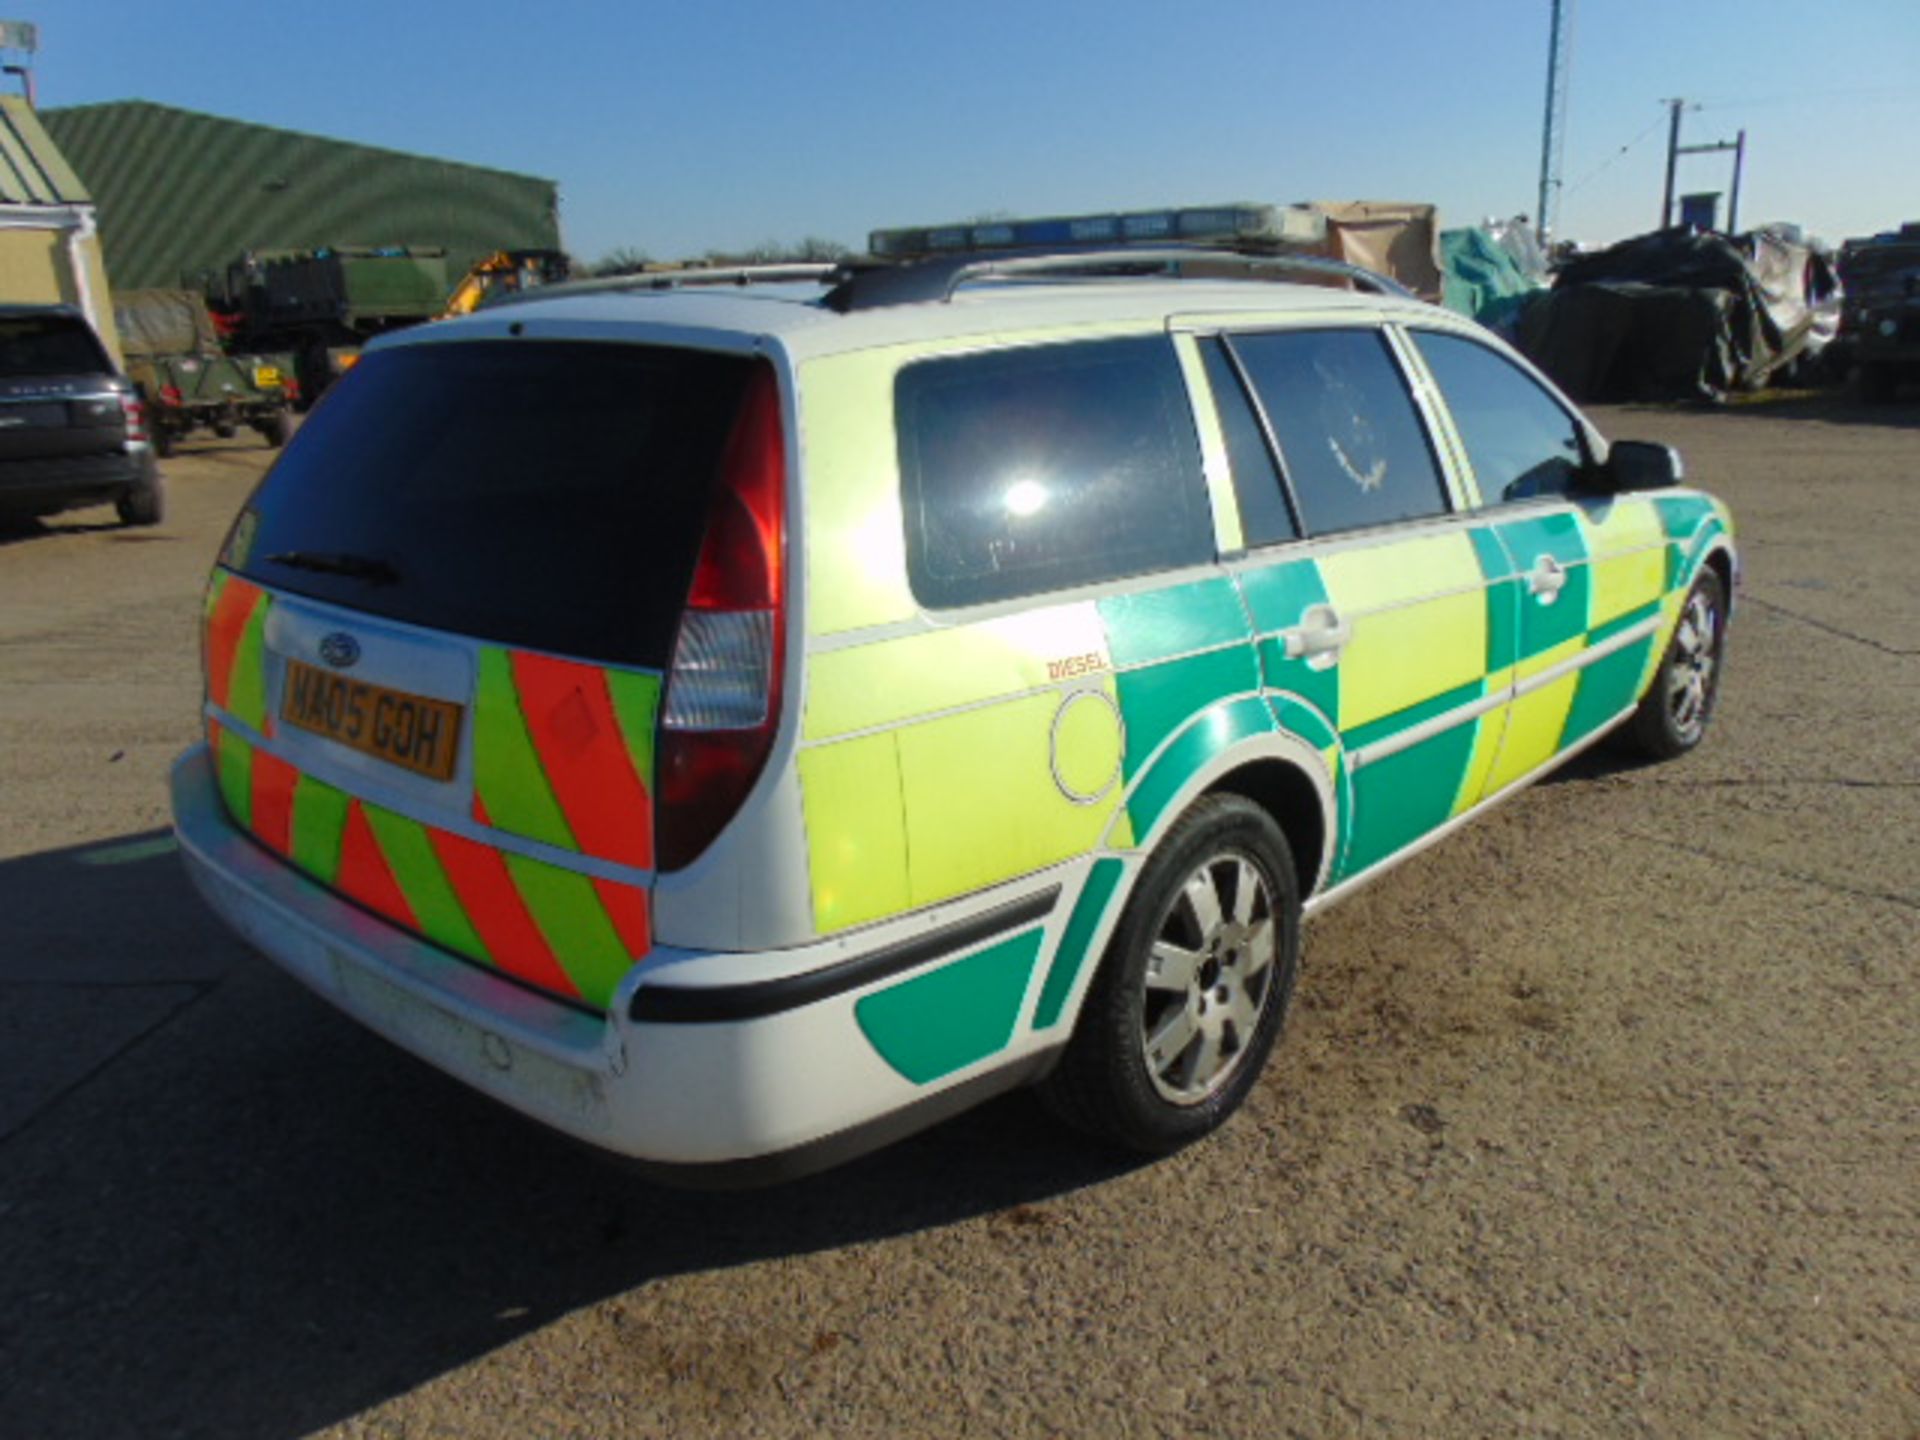 Ford Mondeo 2.0 Turbo diesel ambulance - Image 8 of 14